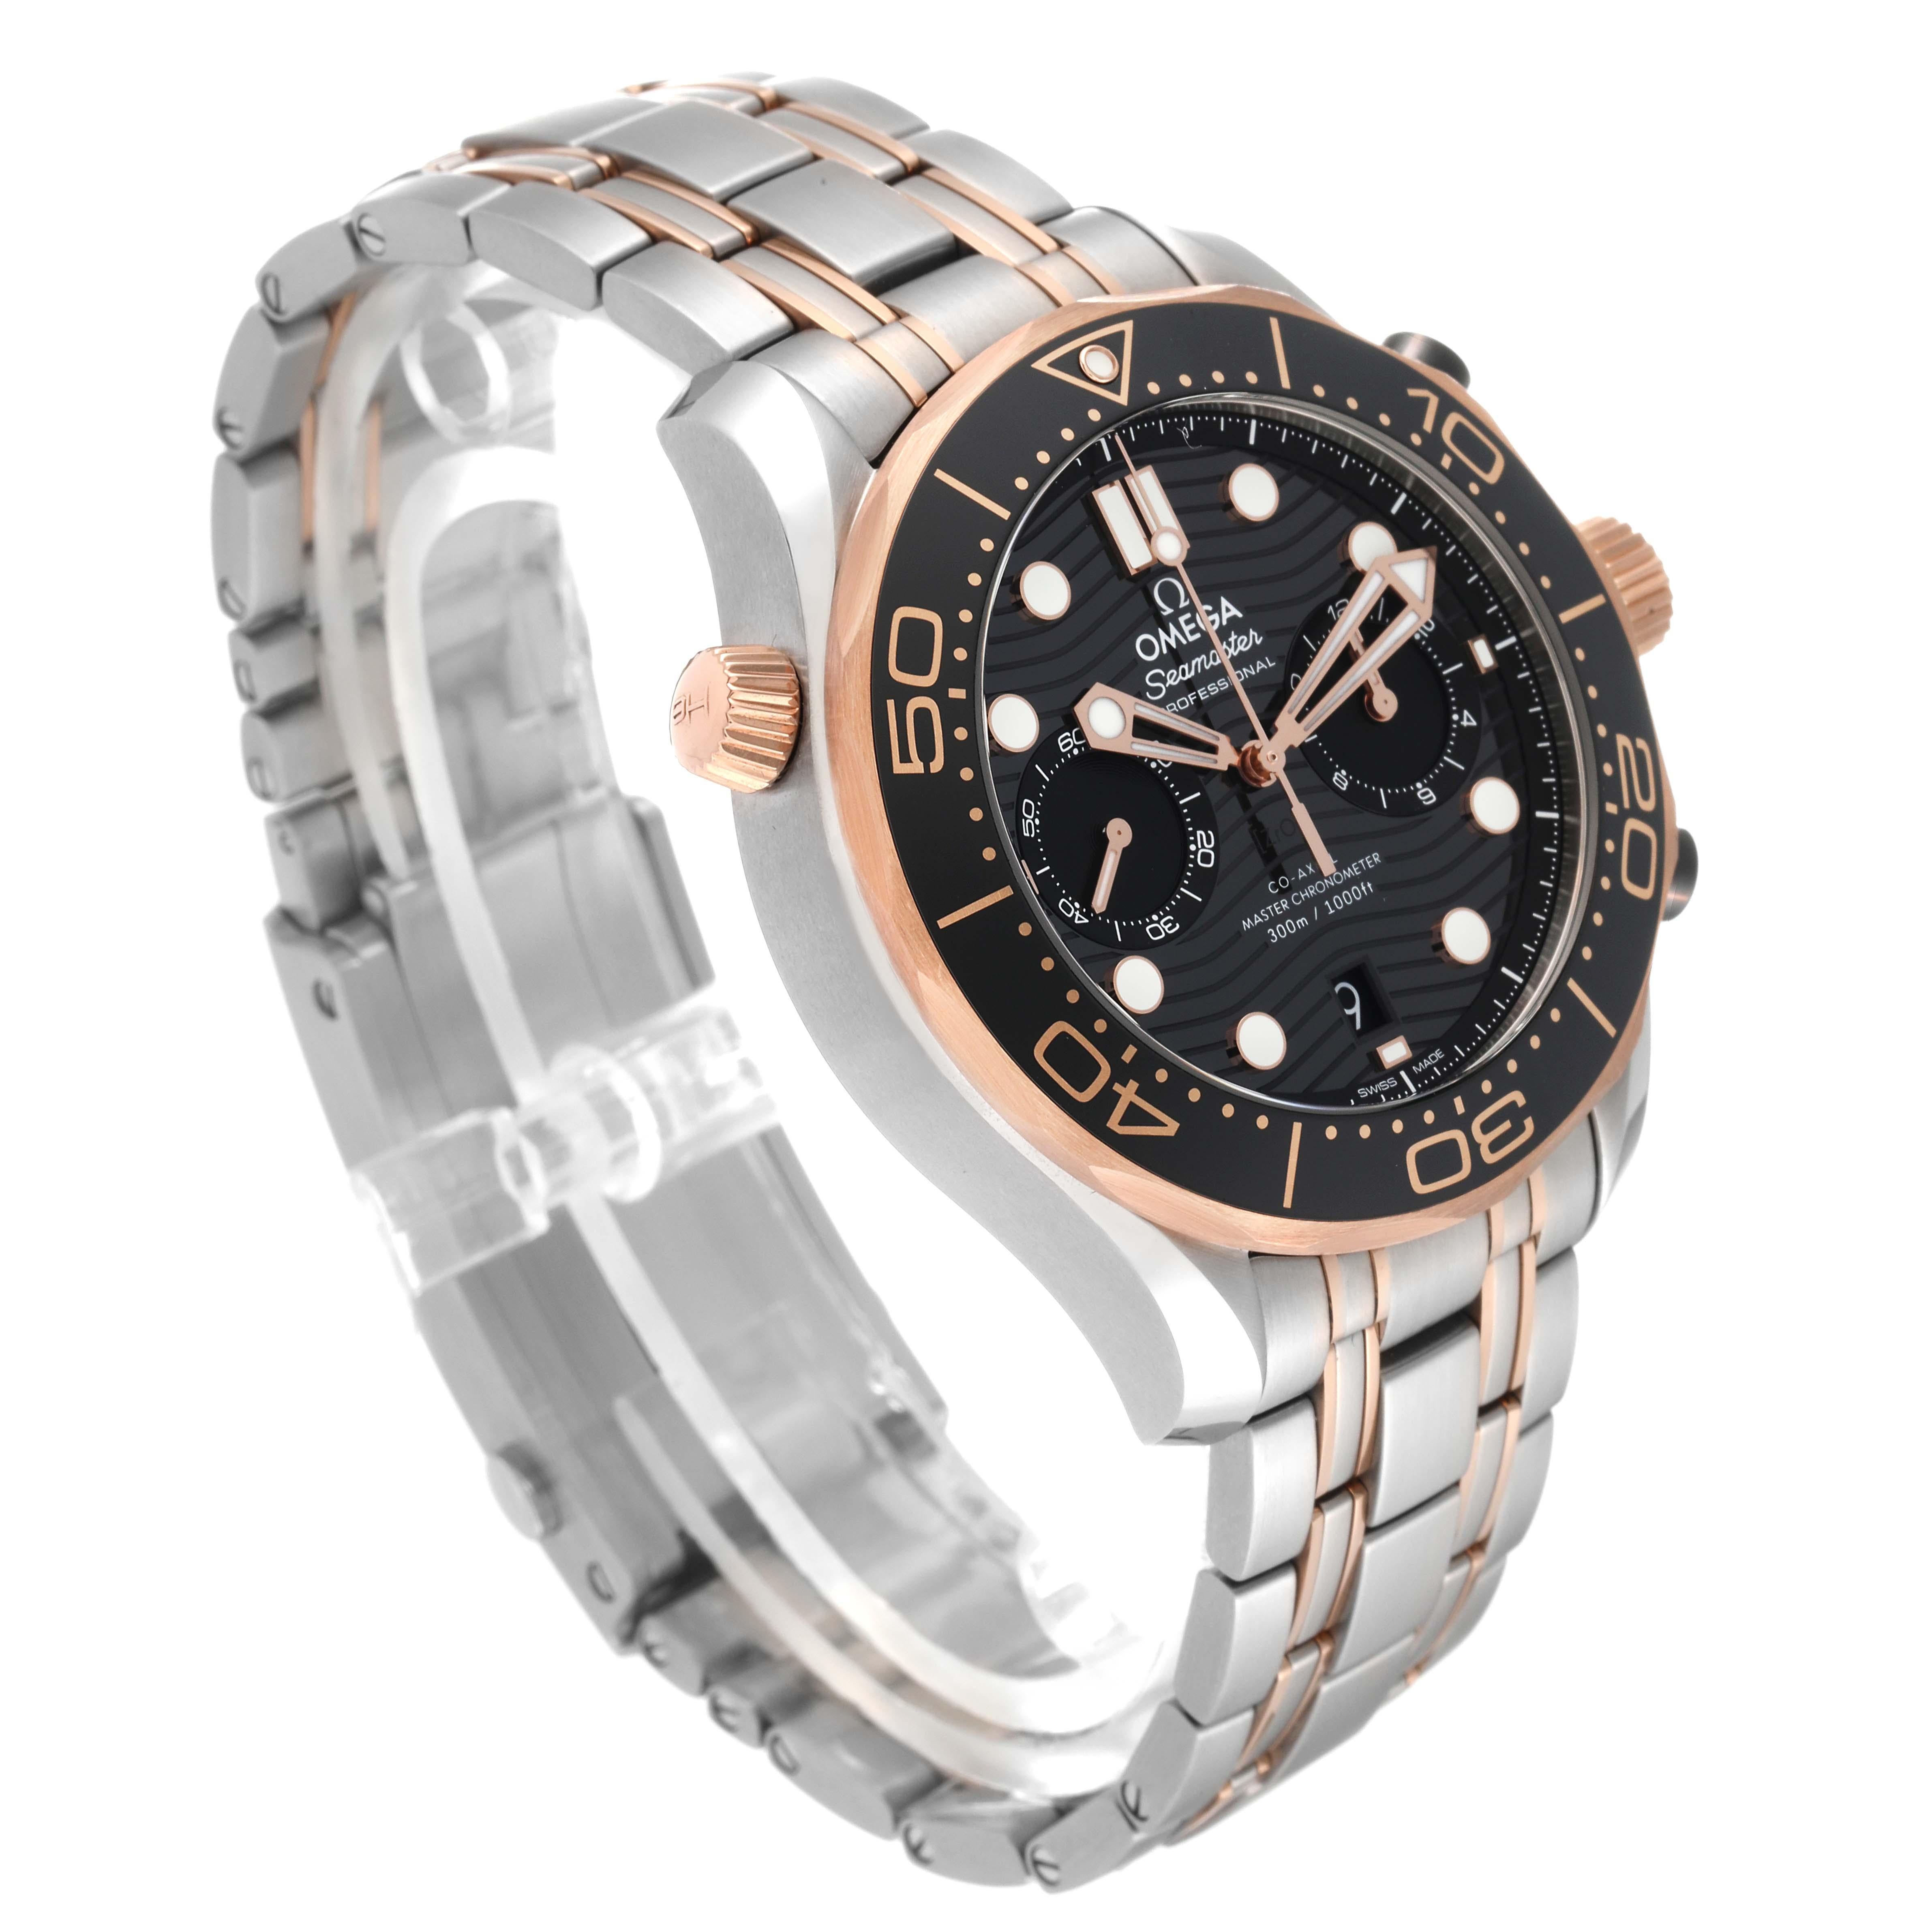 Omega Seamaster Diver Steel Rose Gold Mens Watch 210.20.44.51.01.001 Box Card For Sale 5